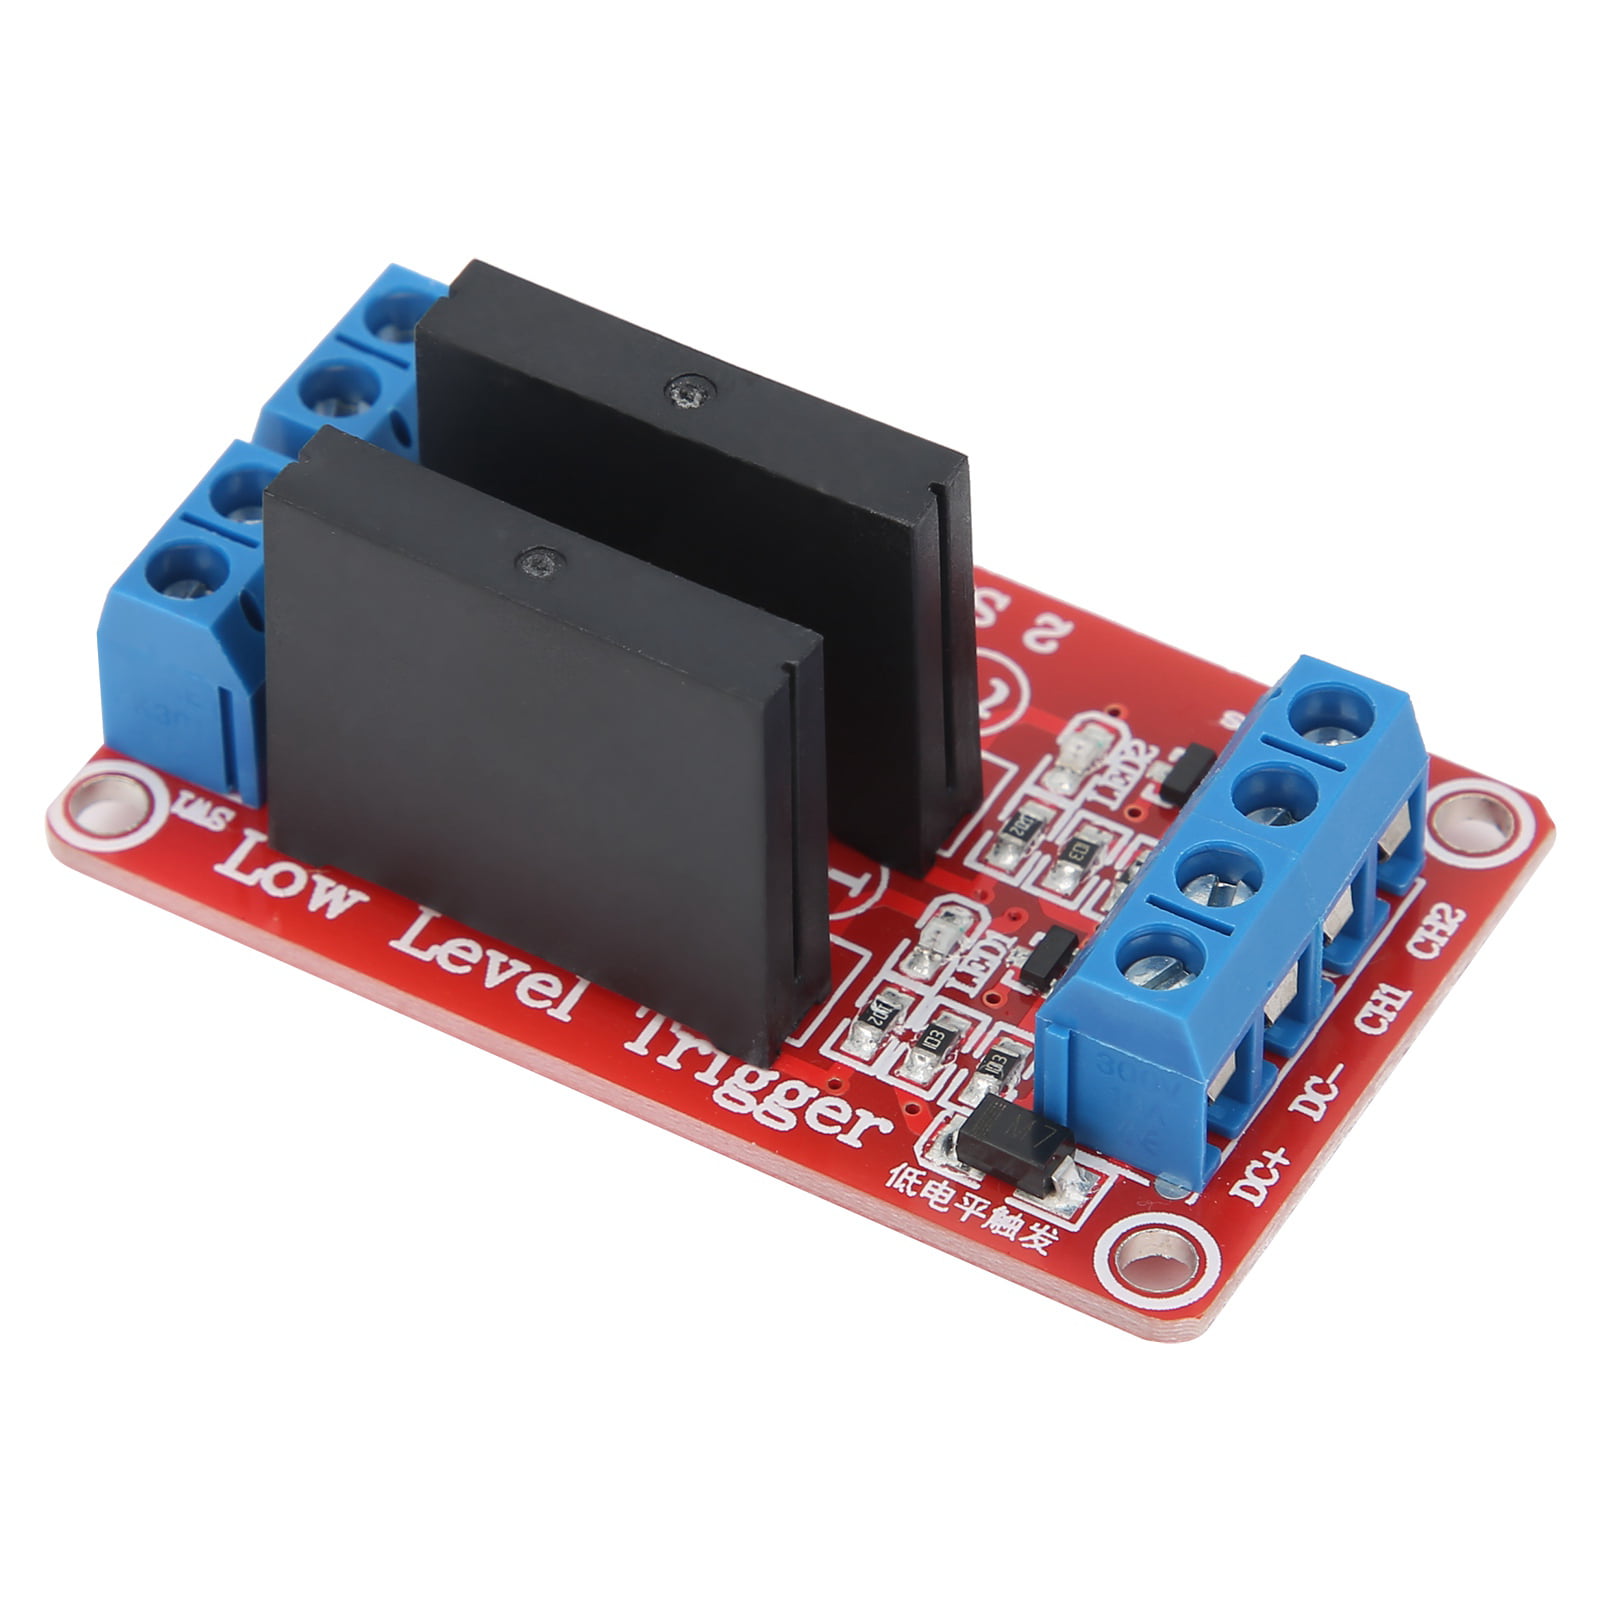 Details about   Relay Control Board SSR Relay Module With Fuse DIY Electrical Supplies 240V/2A 